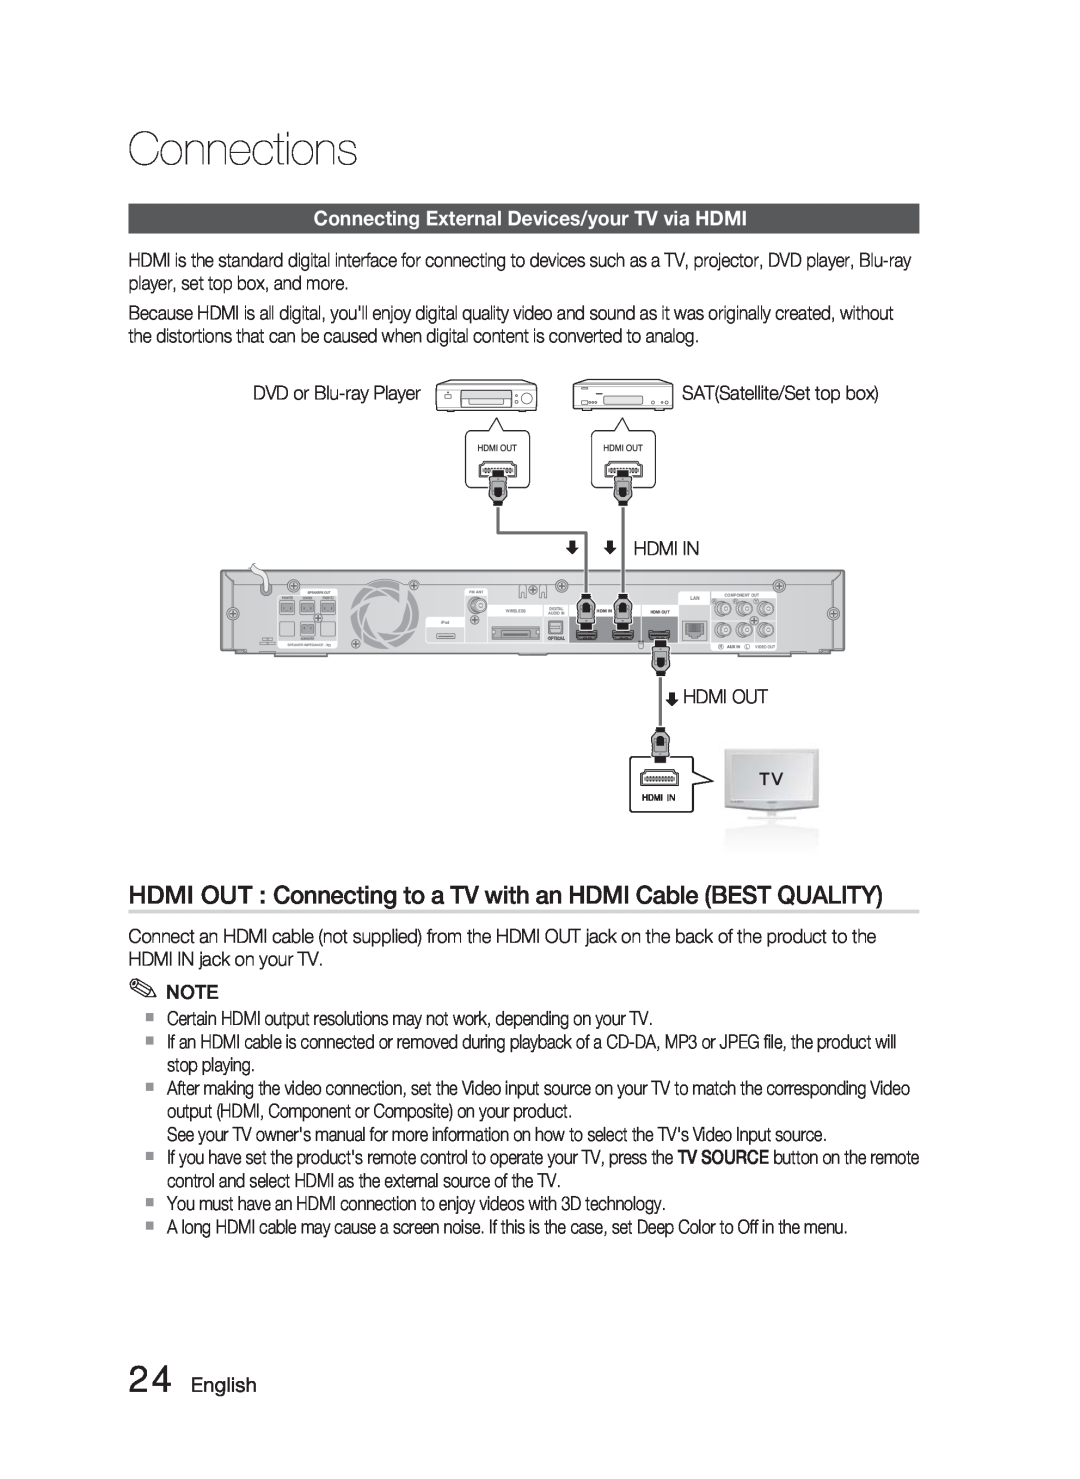 Samsung AH68-02279R user manual Connecting External Devices/your TV via HDMI, English, Connections 